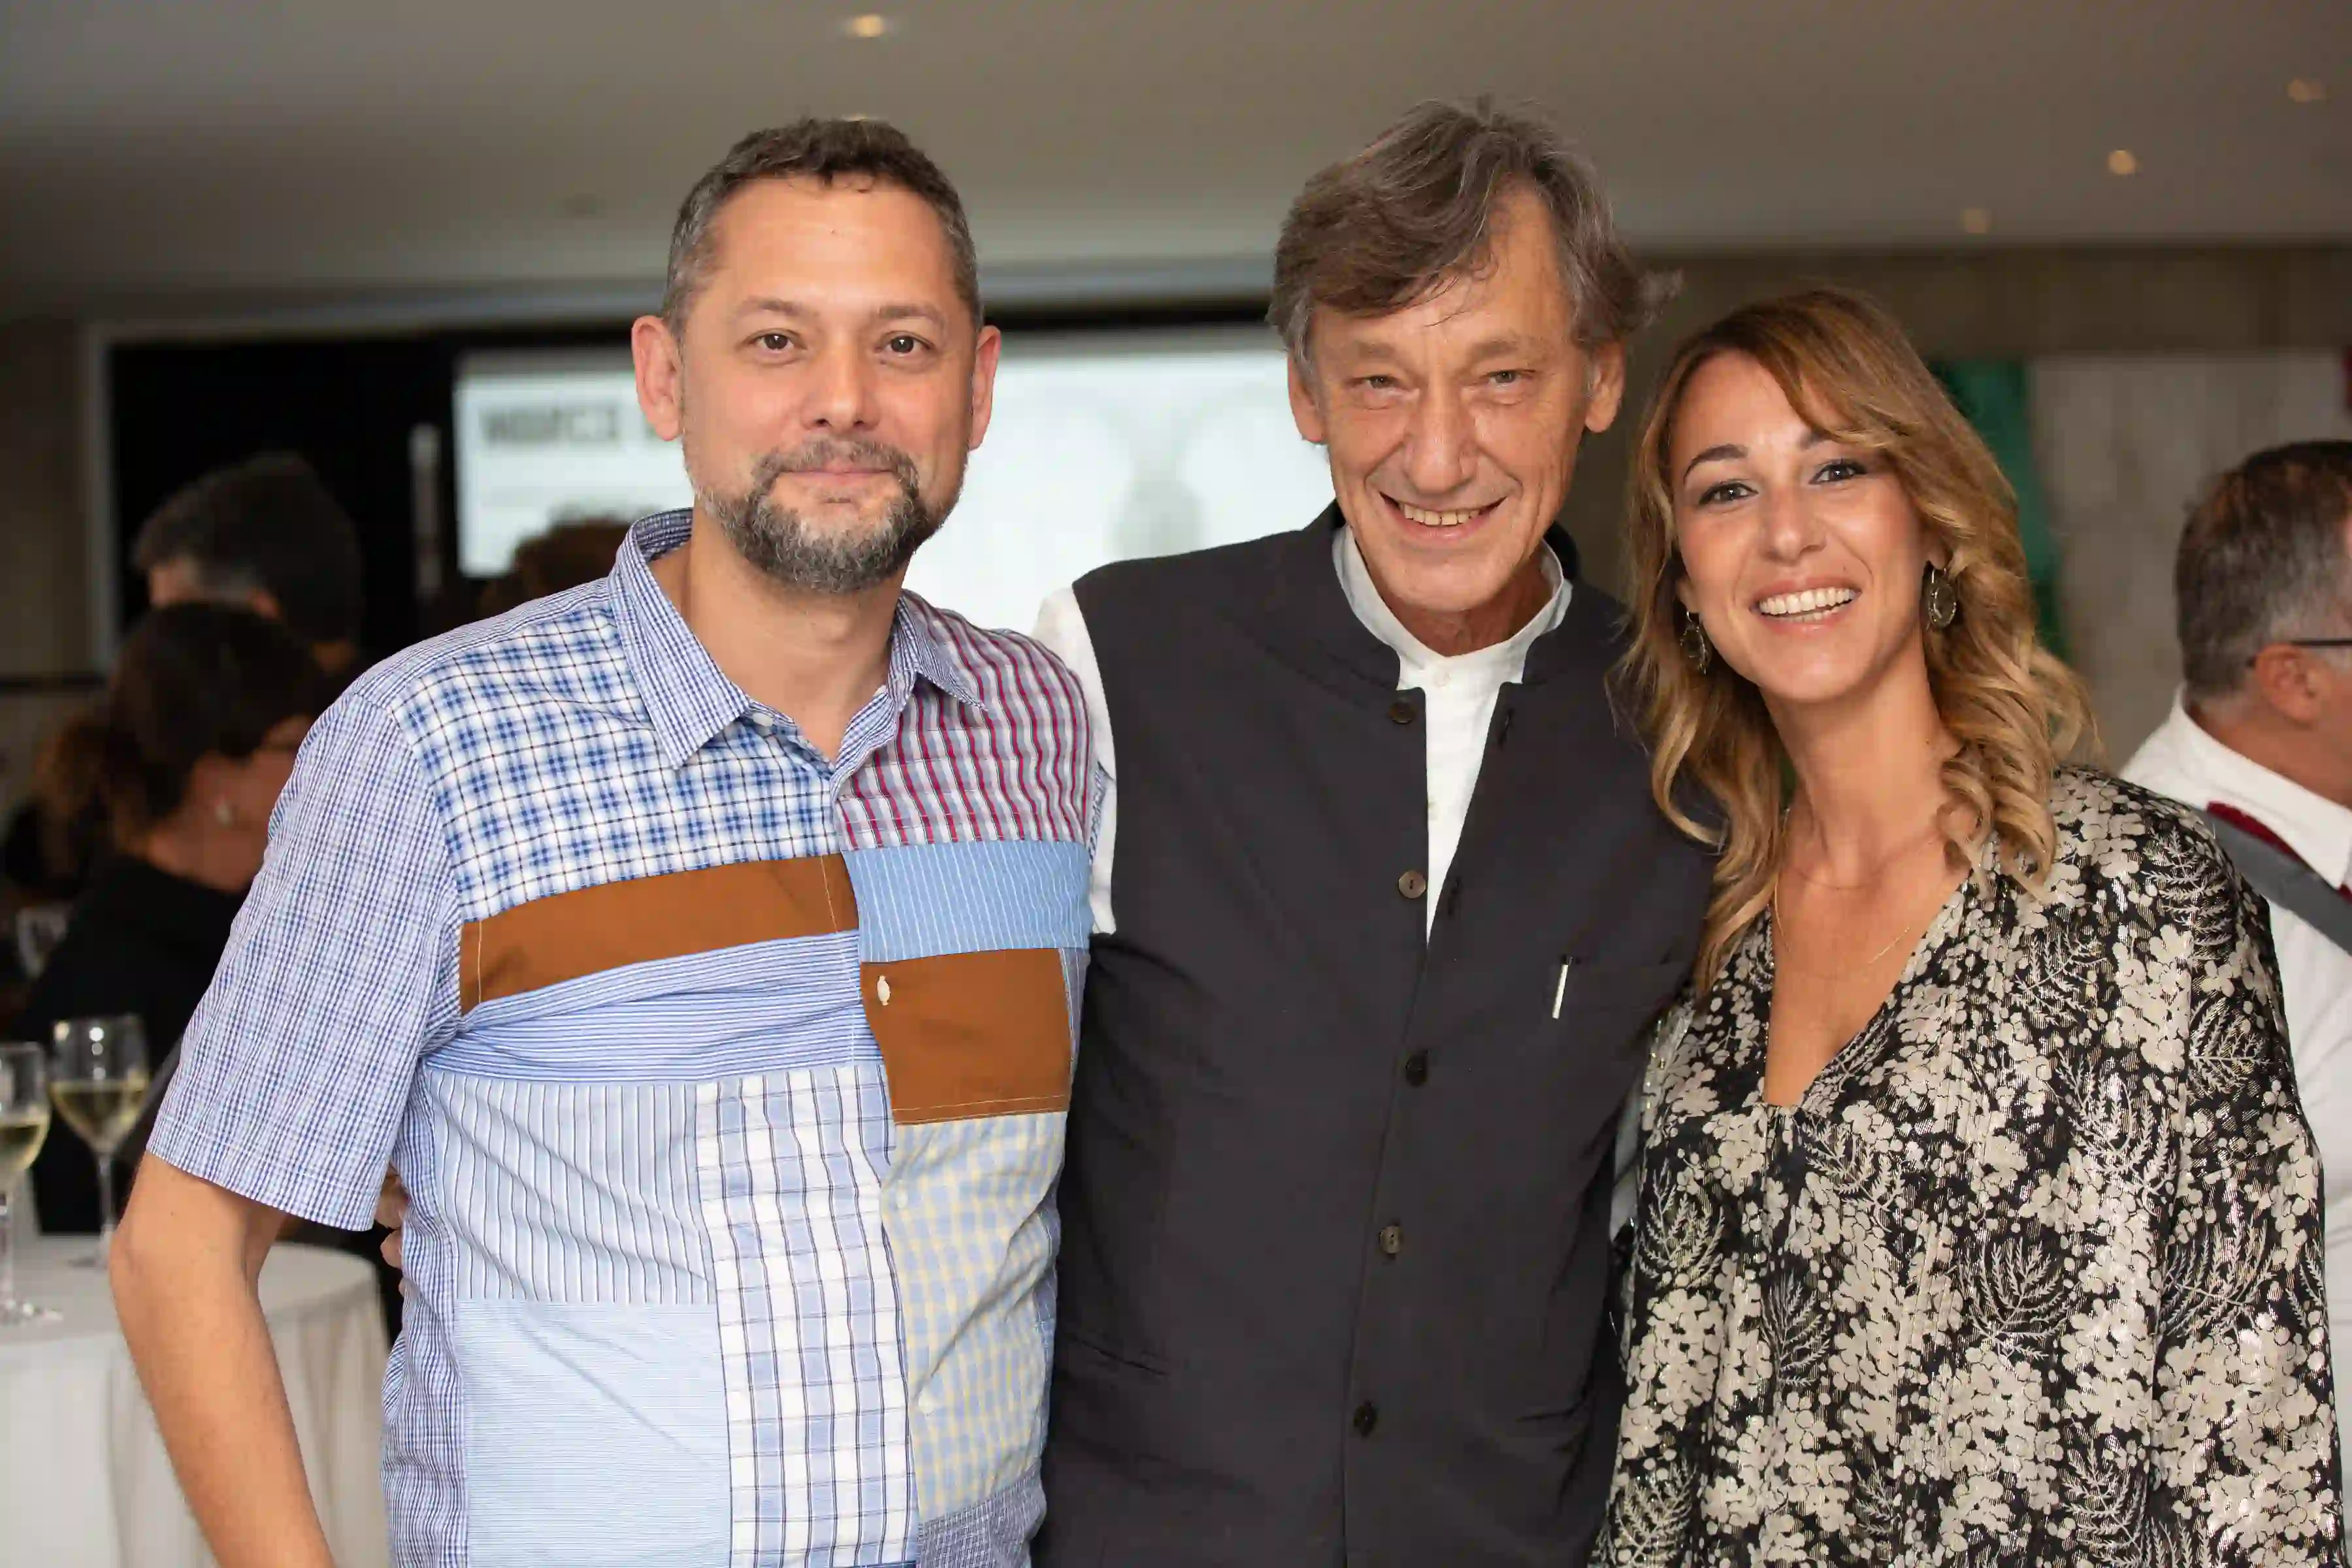 Marco Bagnoli photographed with attendees